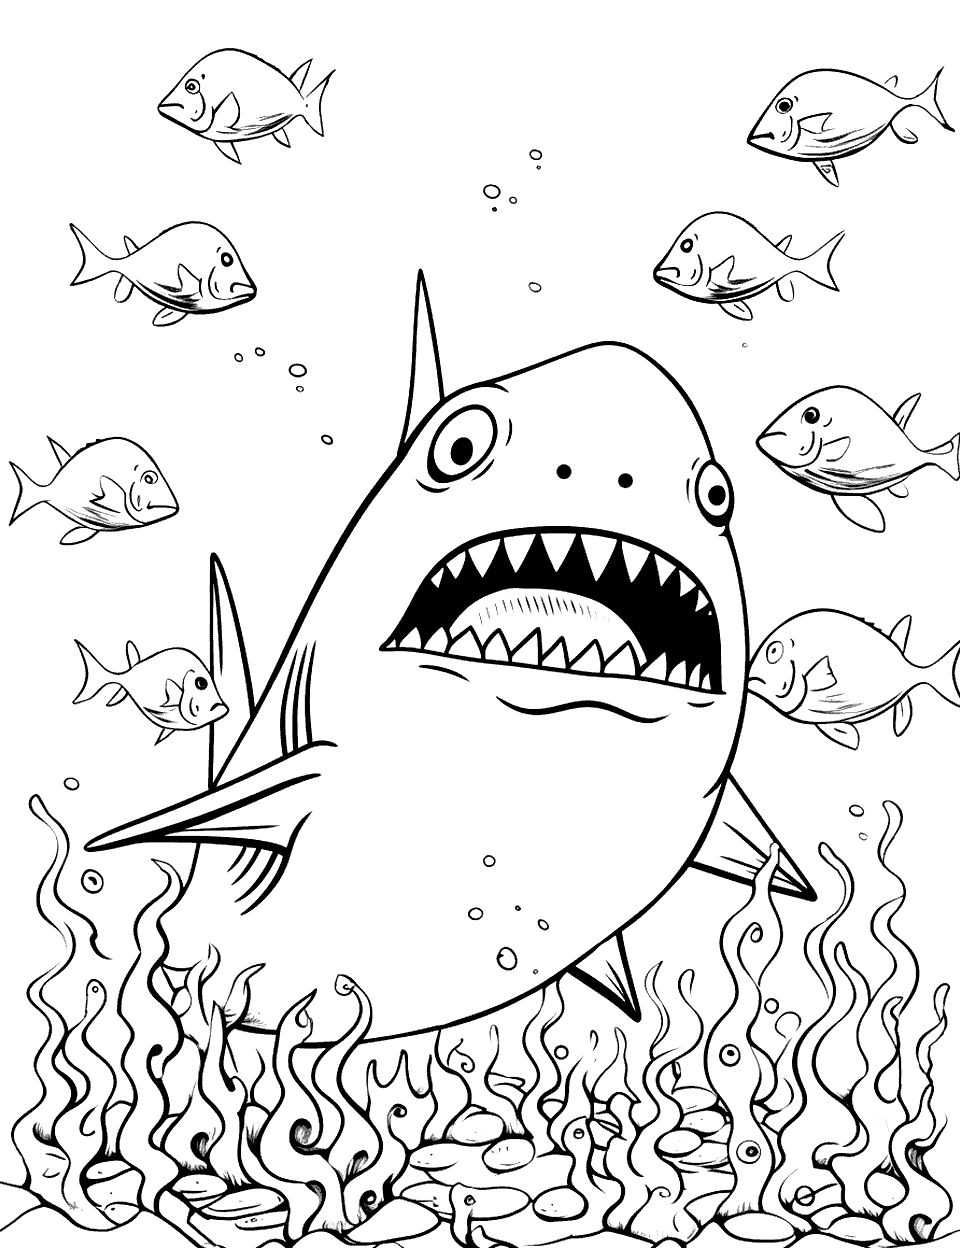 Underwater Volcano with Shark Baby Coloring Page - Shark and fish swimming away from volcano eruption.